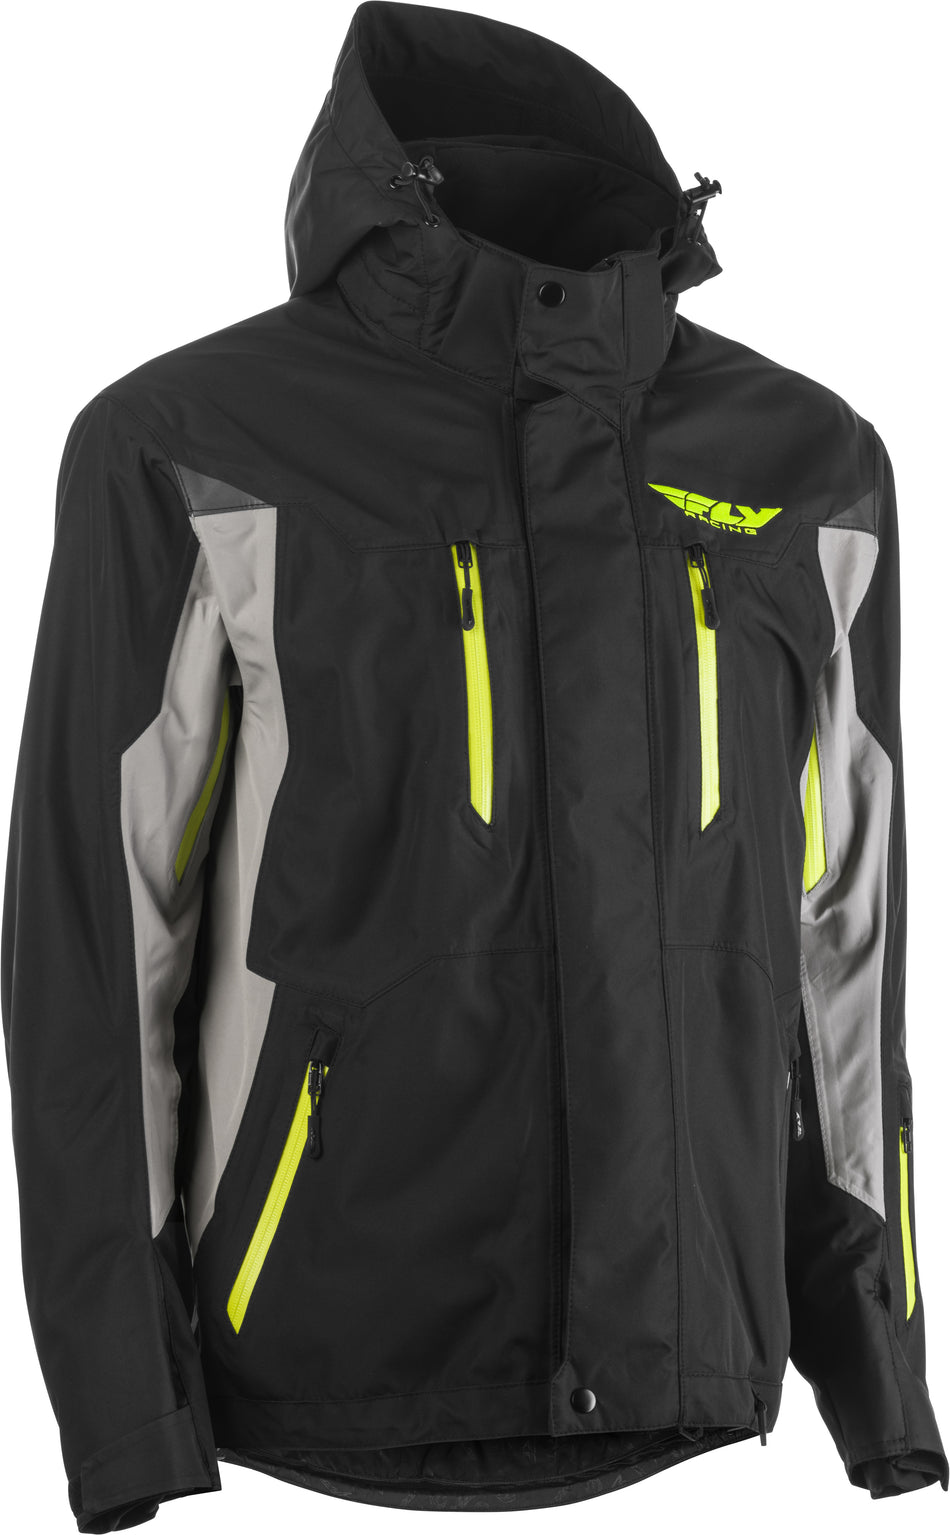 FLY RACING Fly Incline Jacket Grey/Black Md 470-4102M